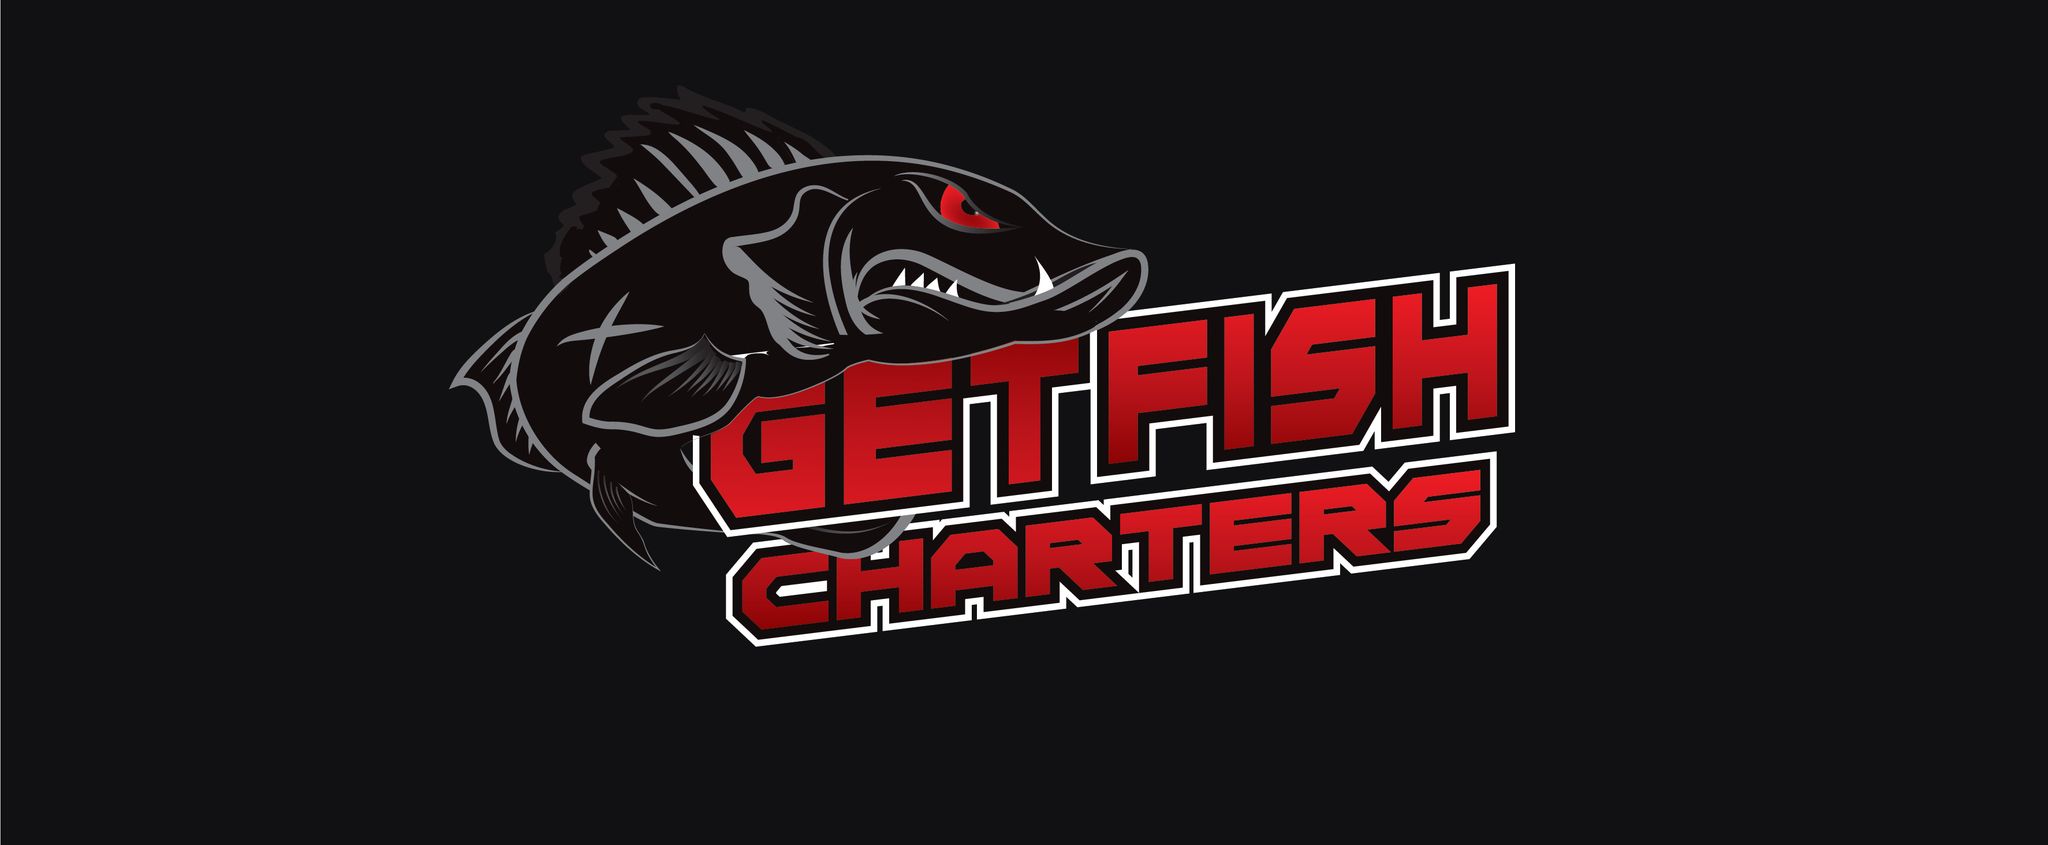 Get Fish Charters